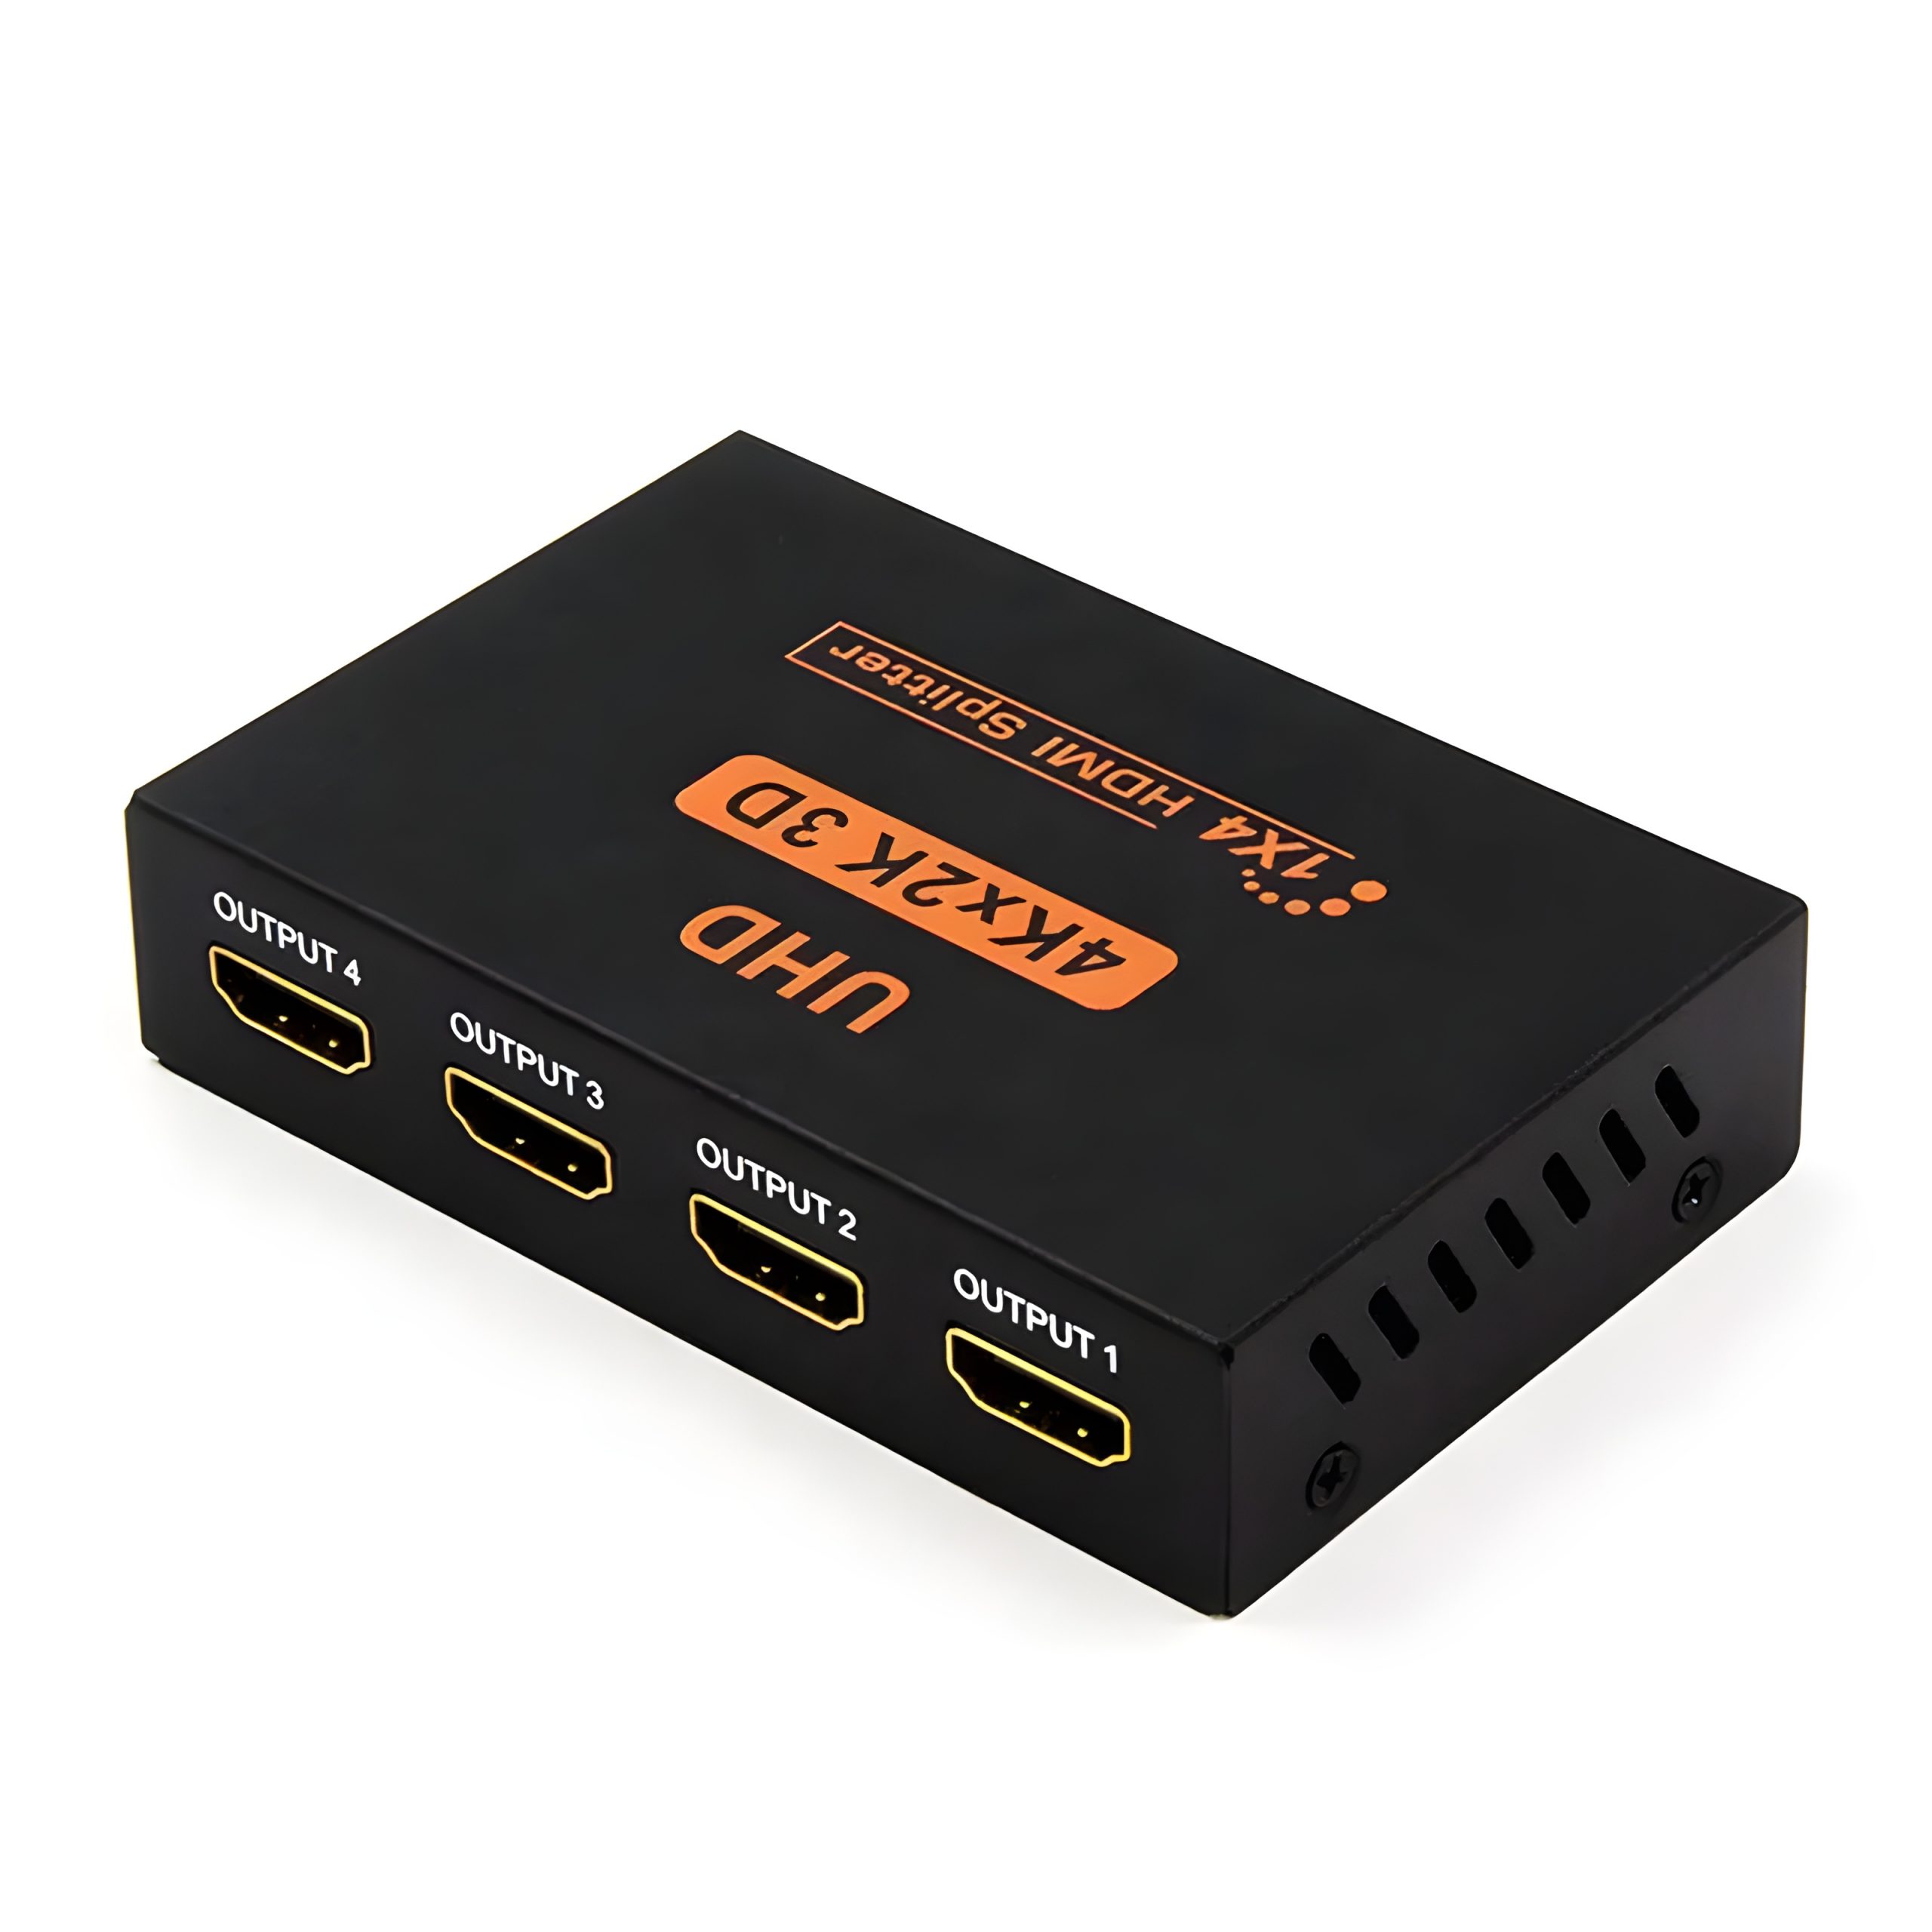 Microware UHD 4K2K 1x4 HDMI Splitter for Full HD 1080P Support 3D (1 in 4  Out) - Black, US Standard